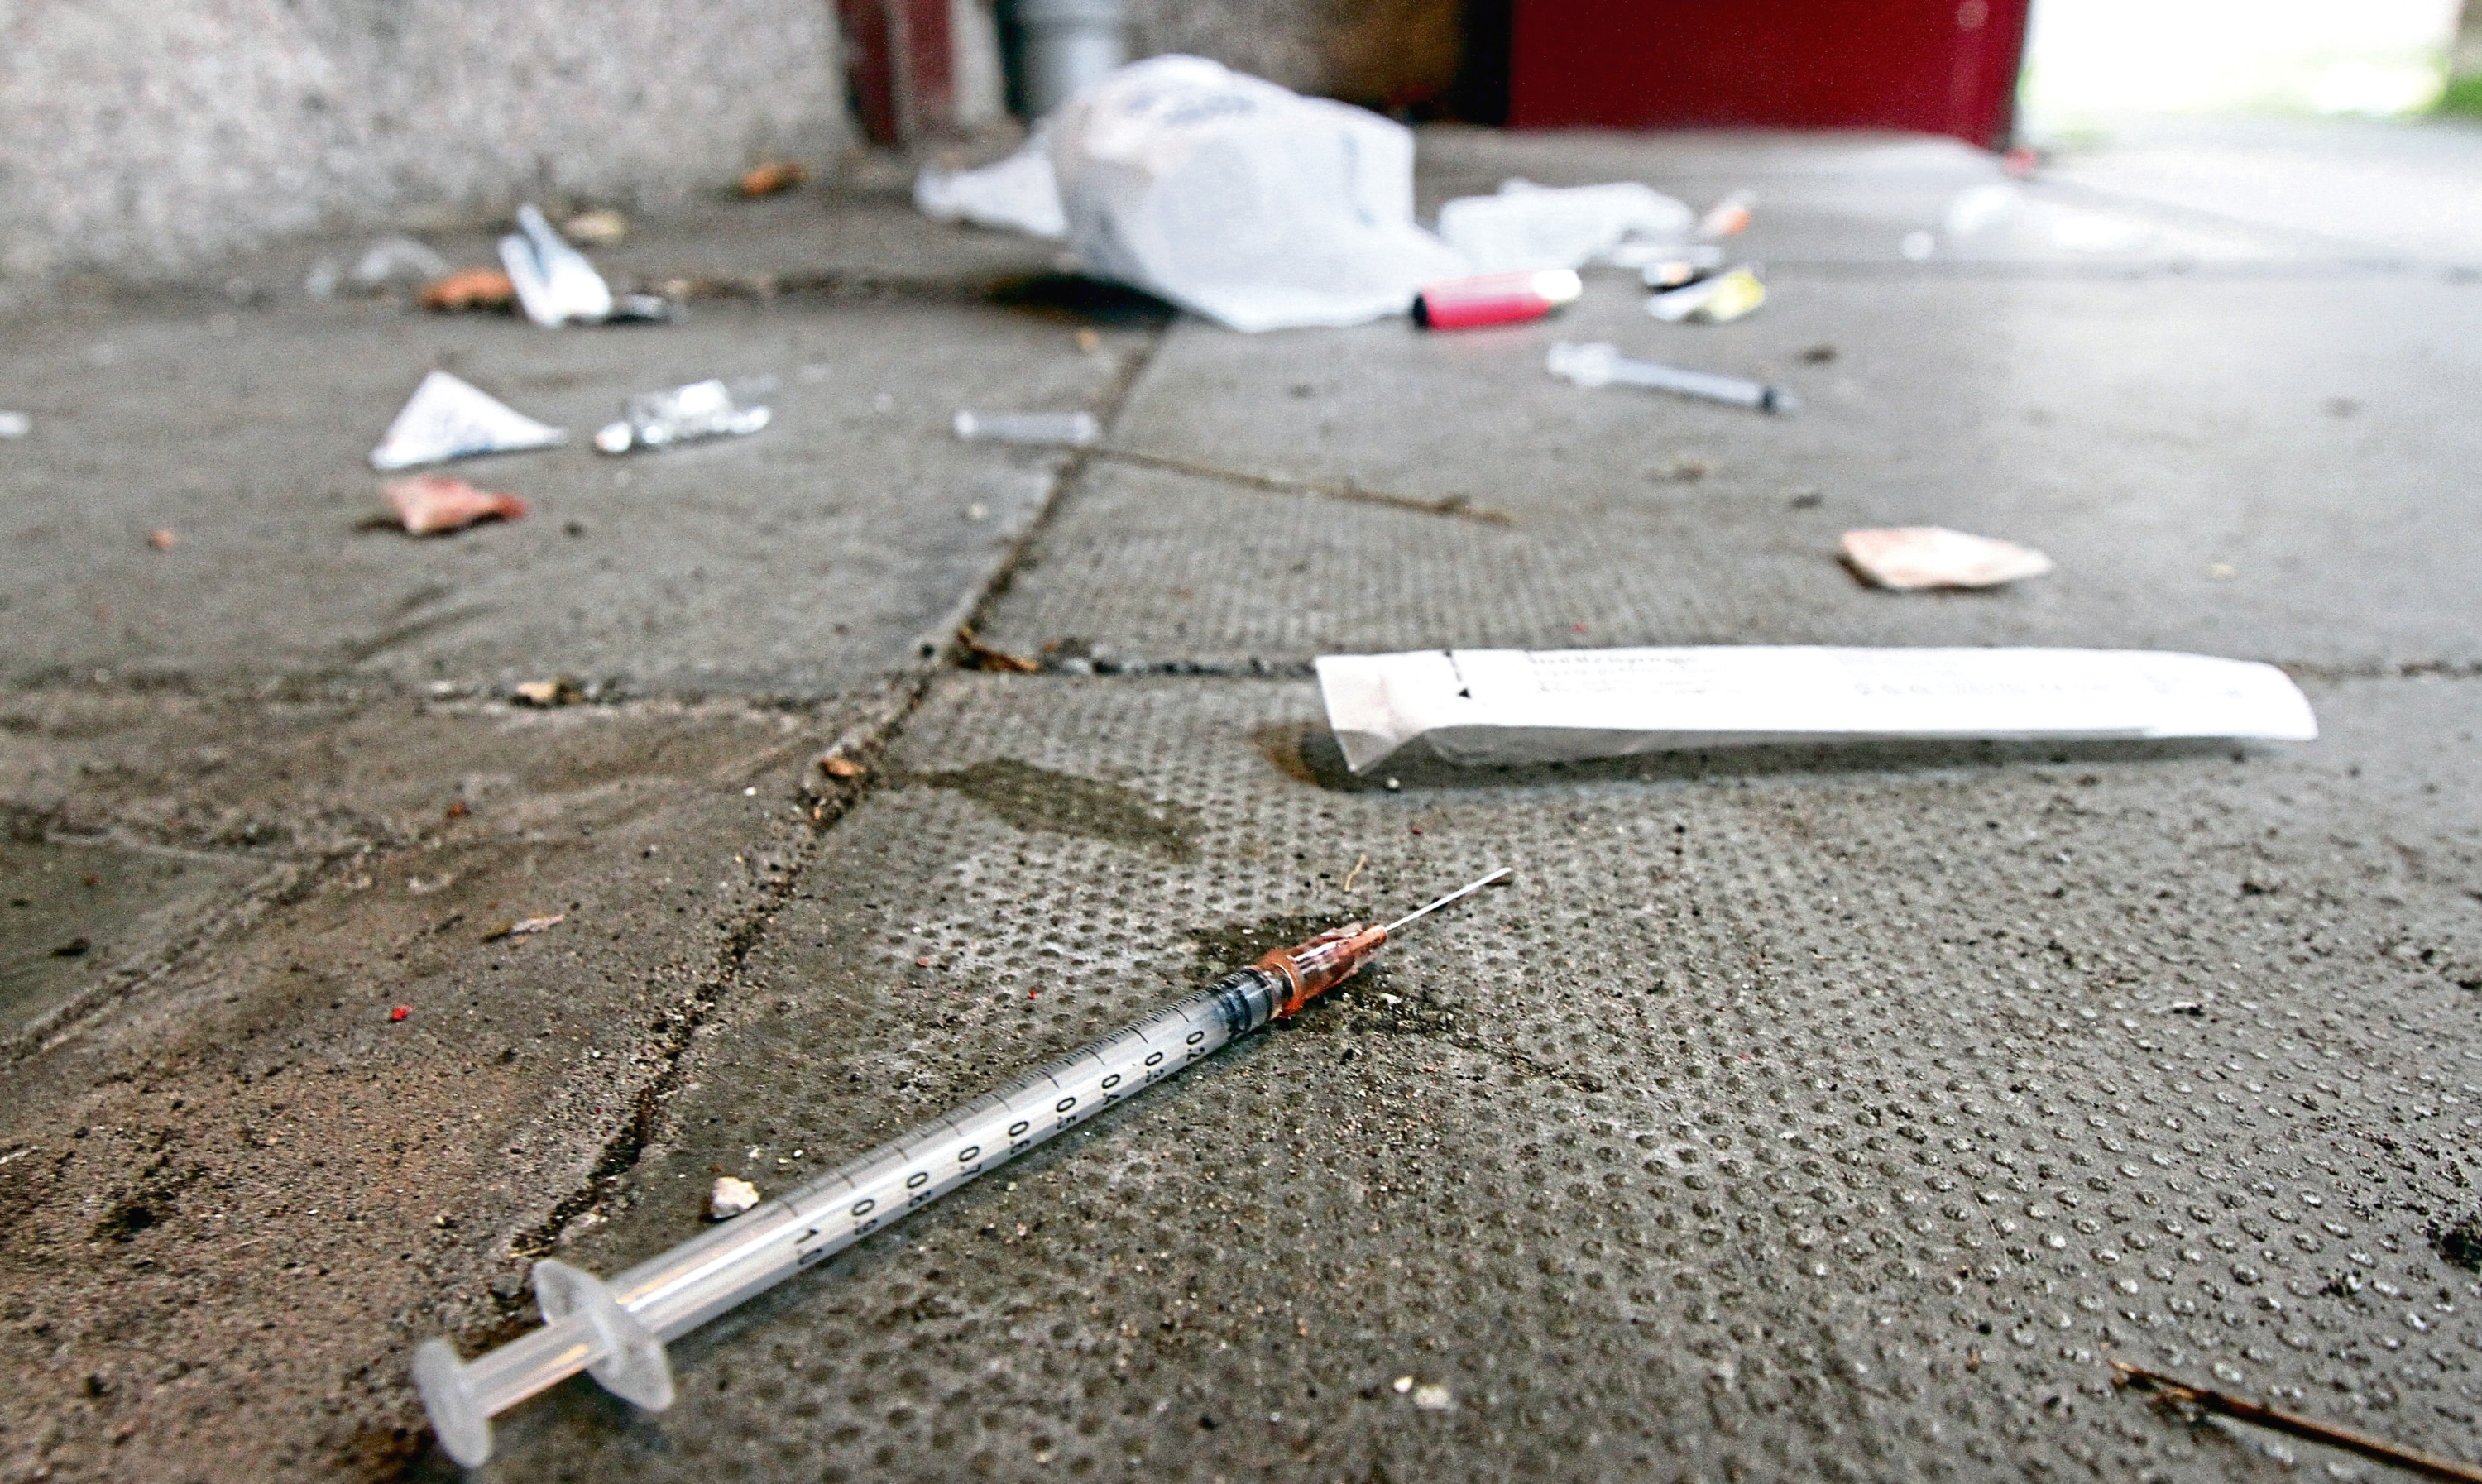 Needles and drug paraphernalia found in Dundee.